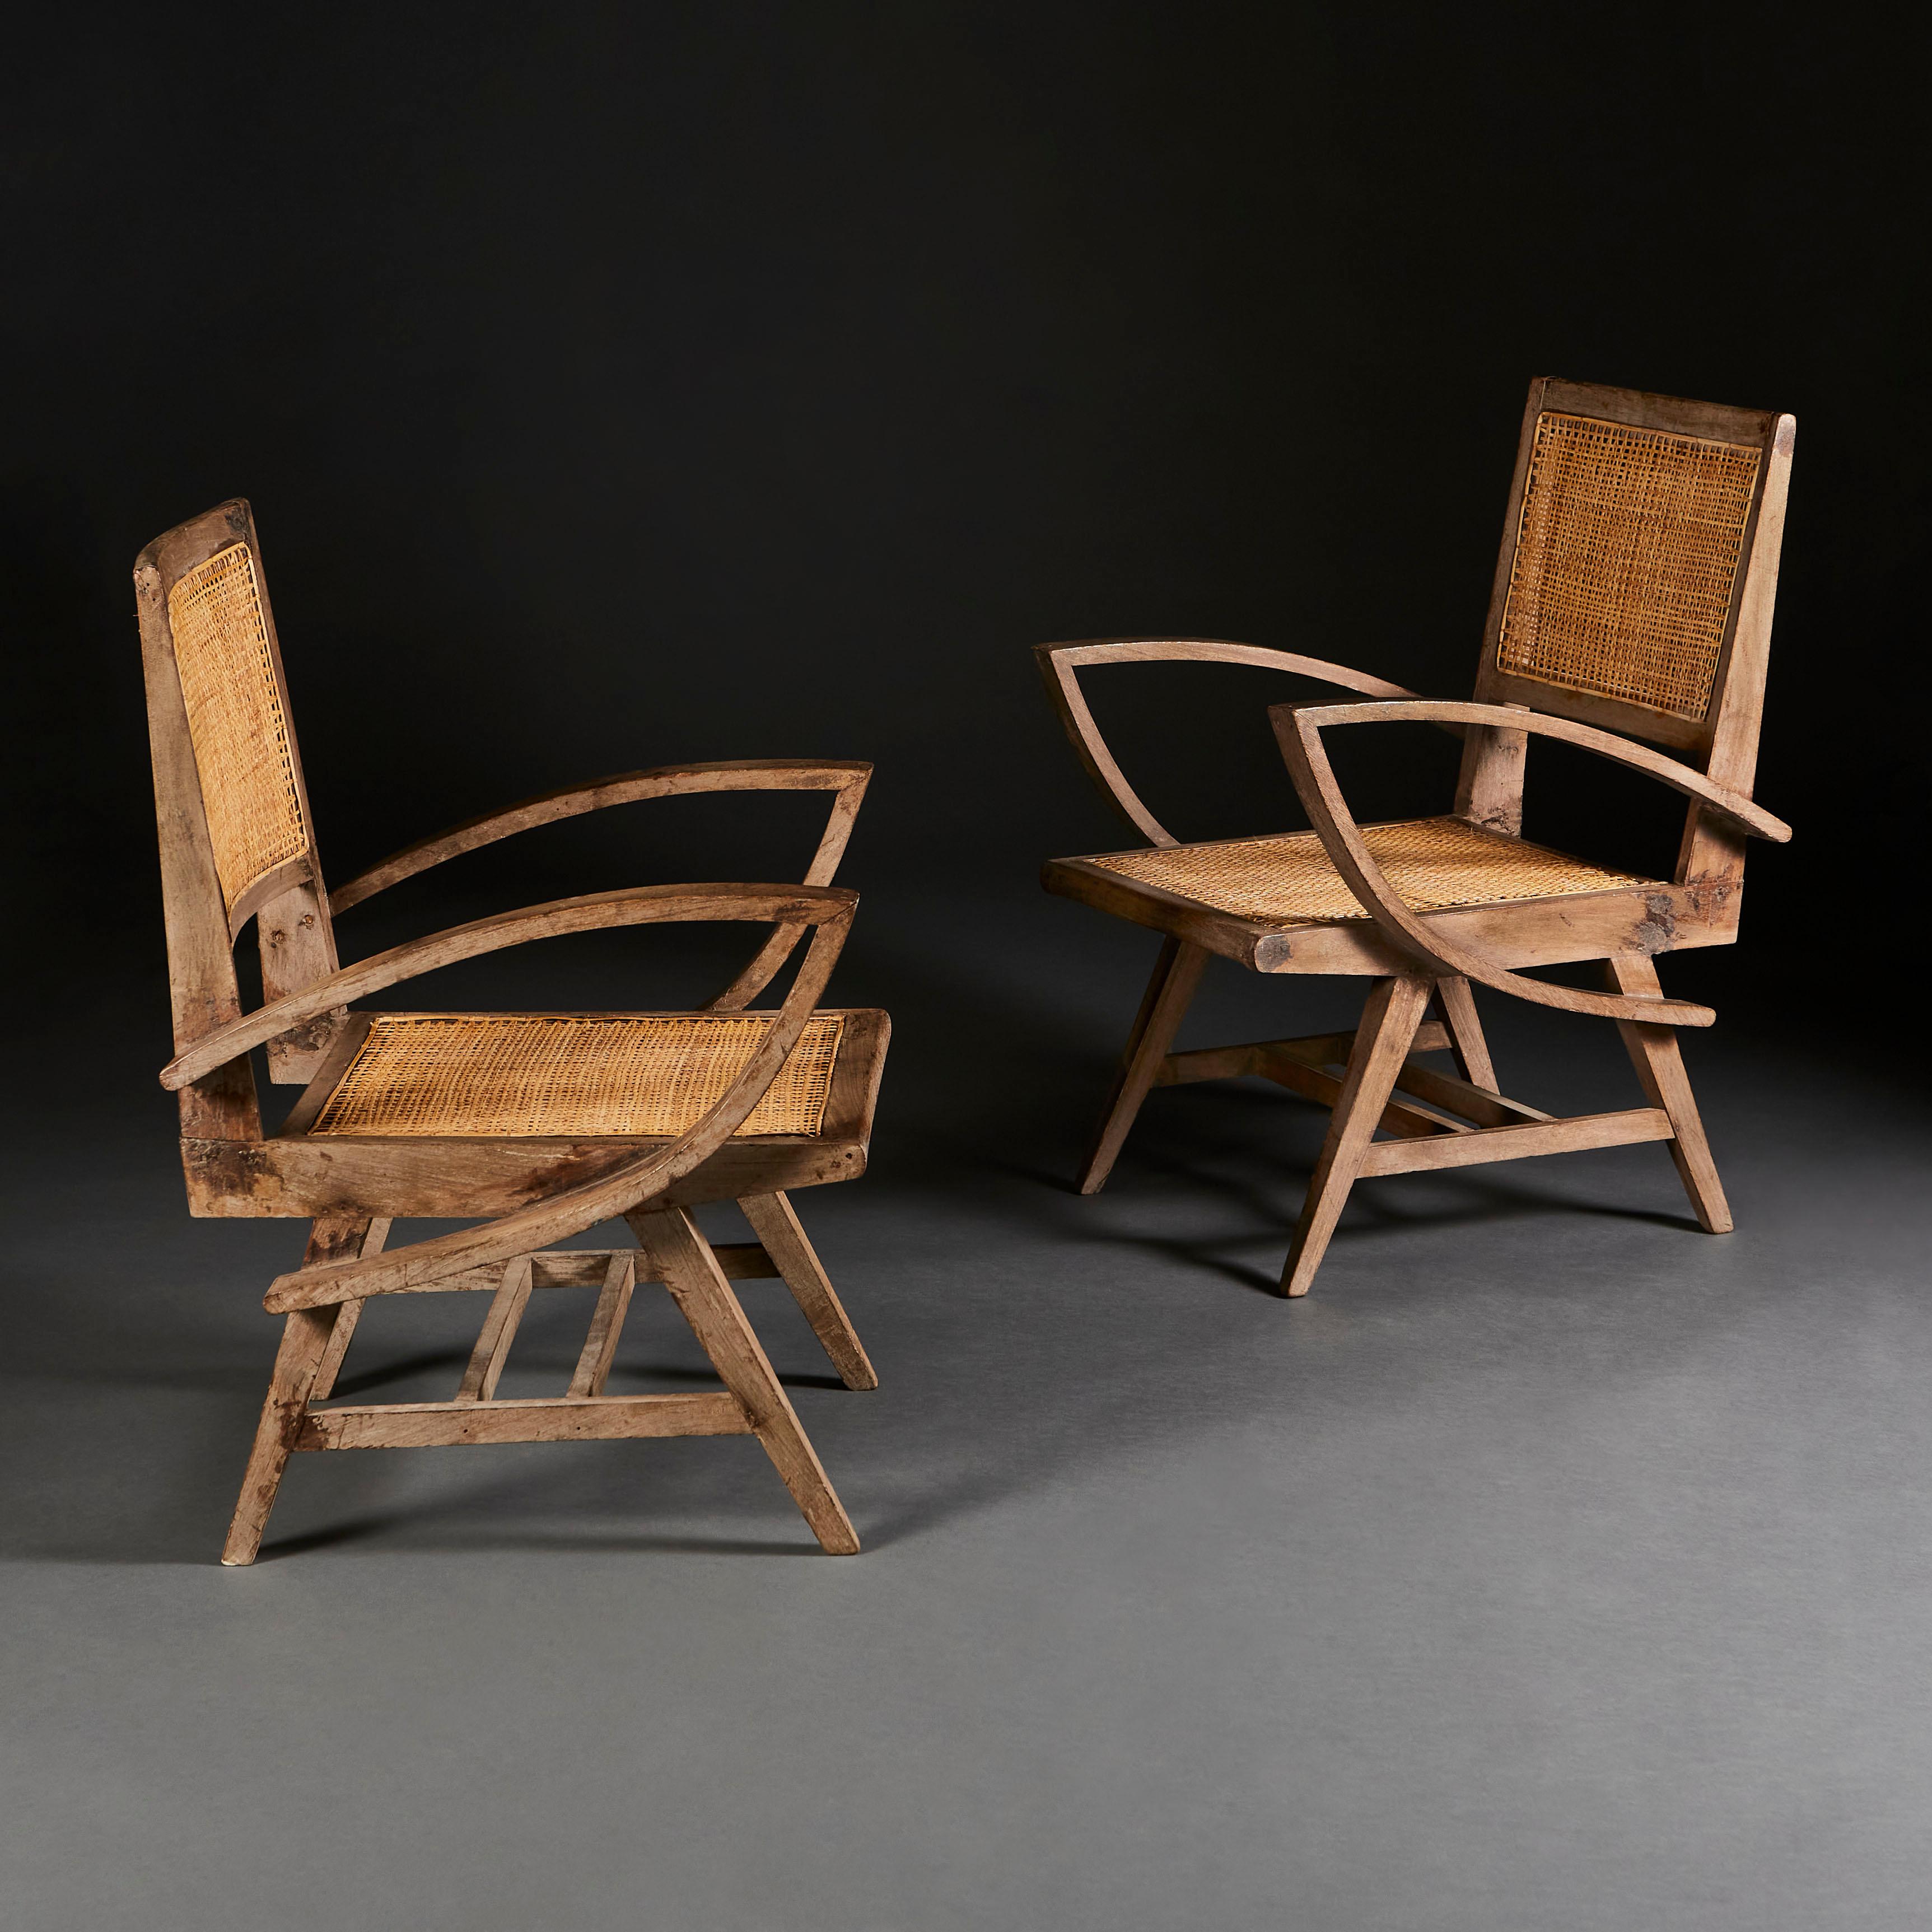 A pair of teak Chandigarh armchairs with caned backs and seats, with lotus leaf form arms, after Pierre Jeanneret.

When Swiss architect Pierre Jeanneret devised a teak-and-cane chair in the 1950s, his reasoning was simple: The people needed